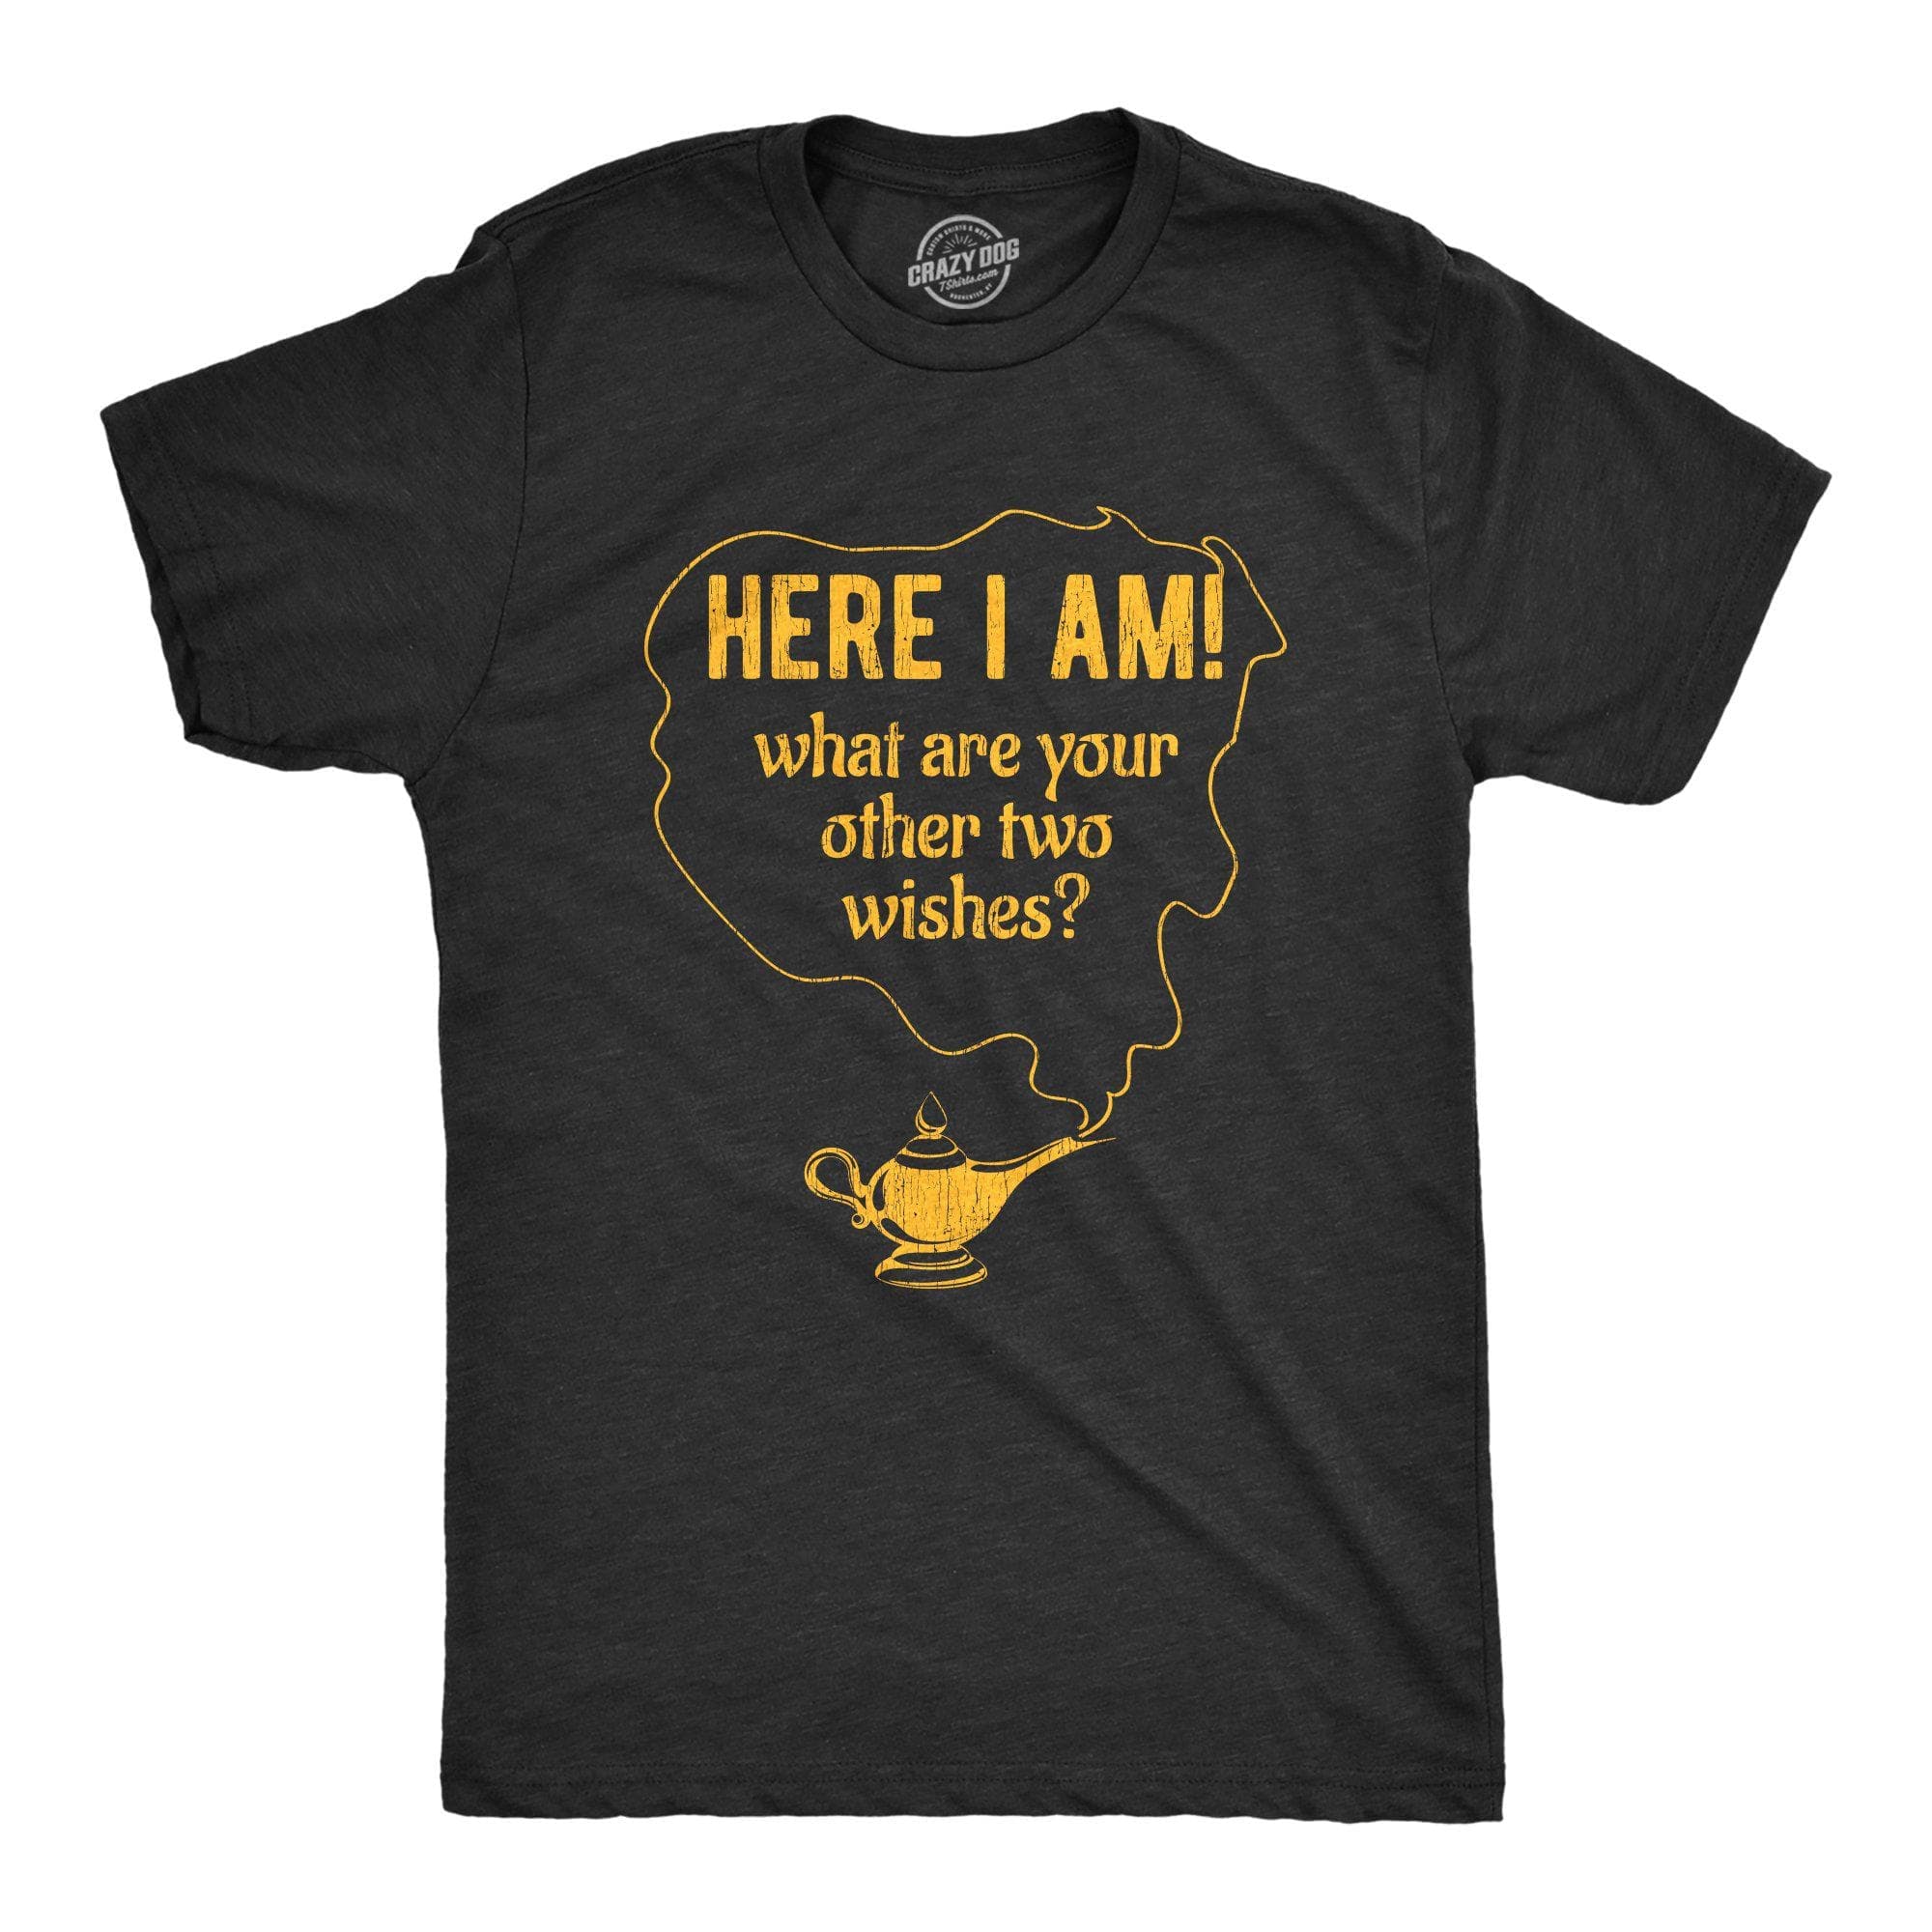 What Are Your Other Two Wishes? Men's Tshirt - Crazy Dog T-Shirts